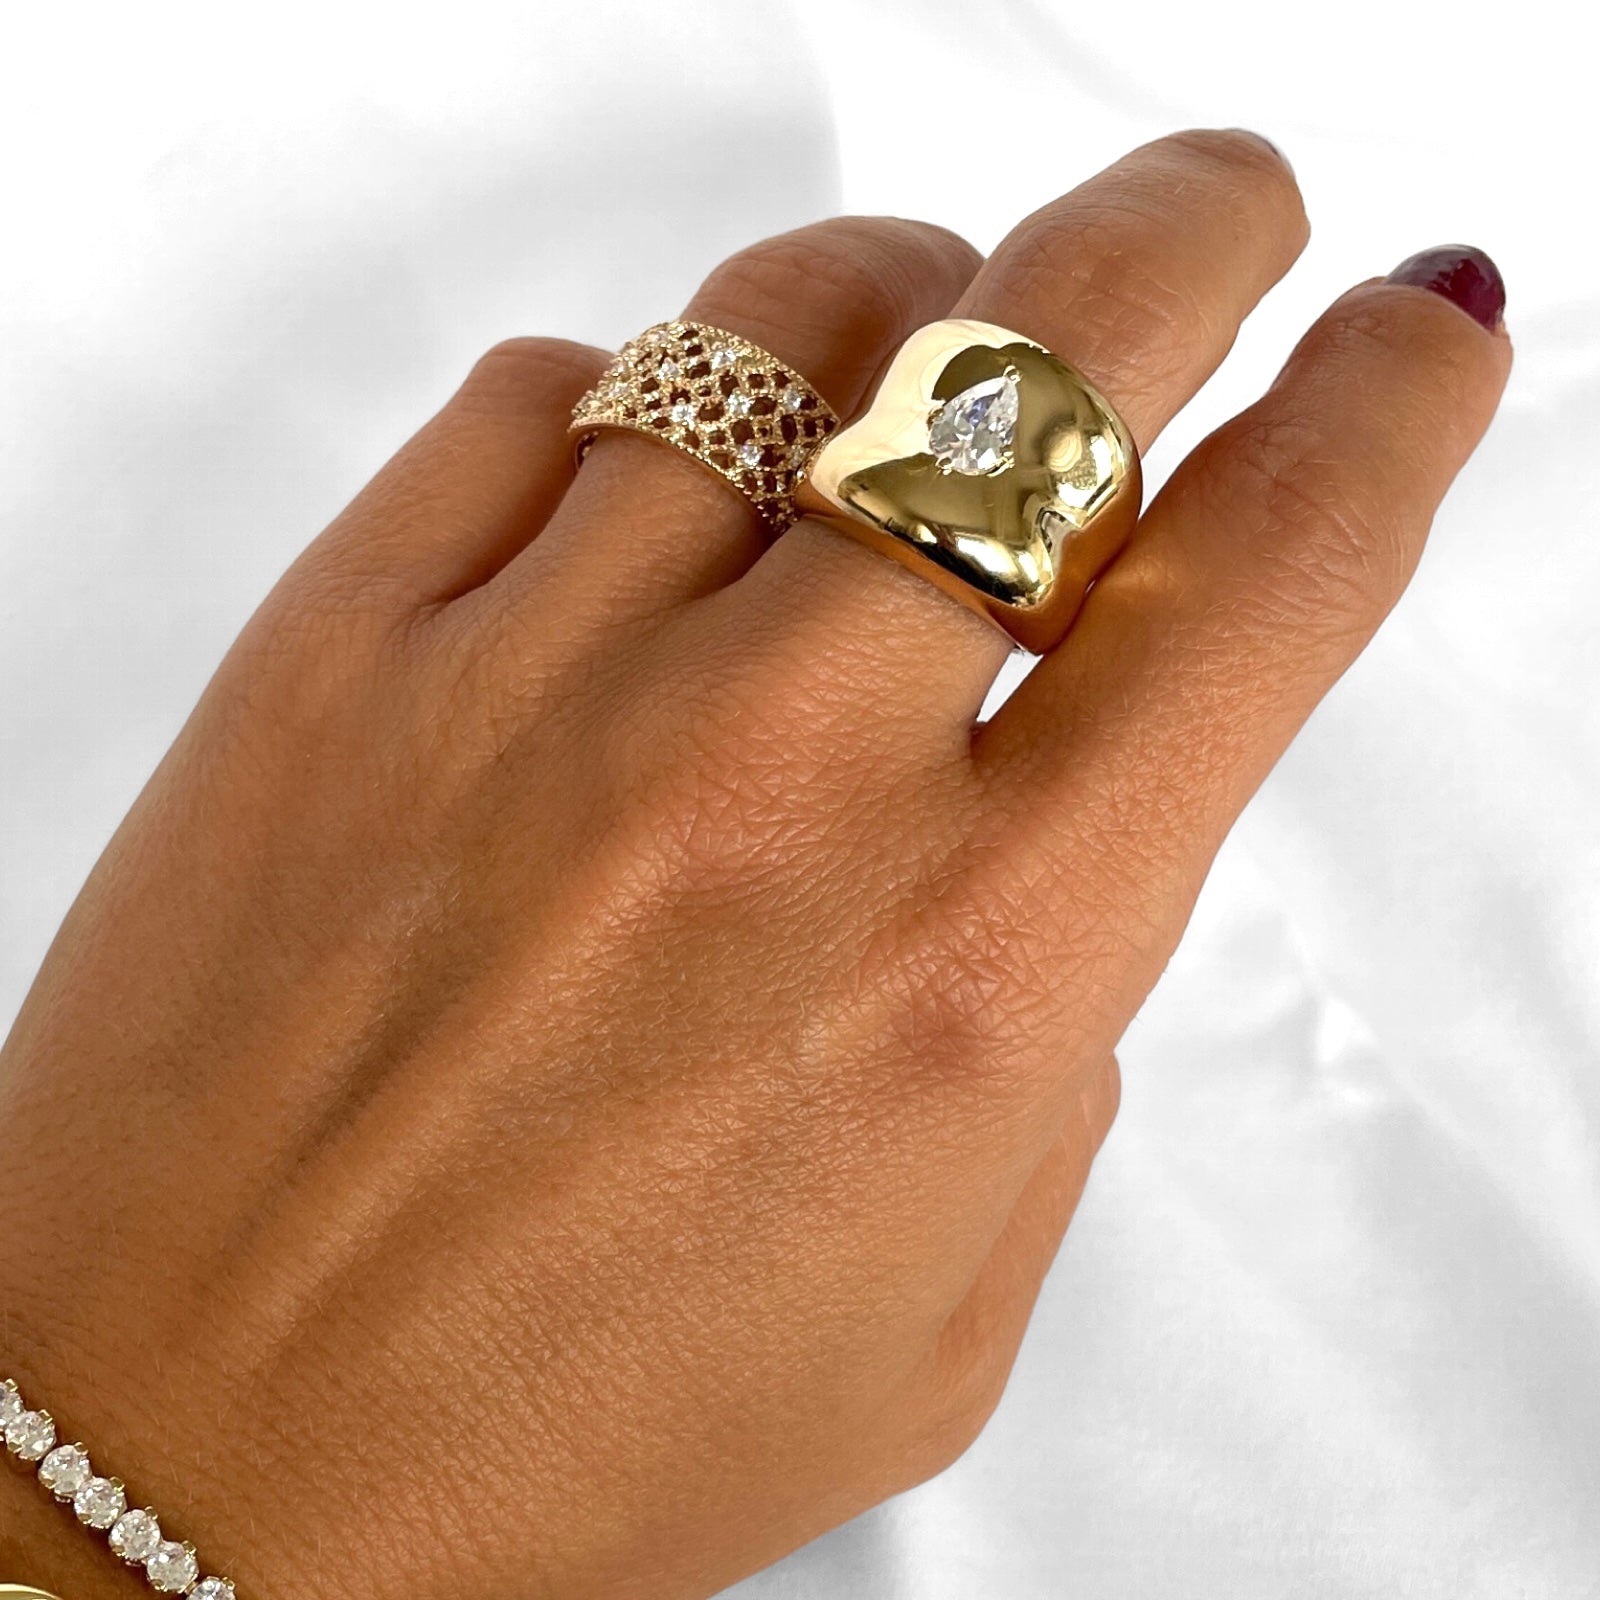 Gold-plated “Kama” ring